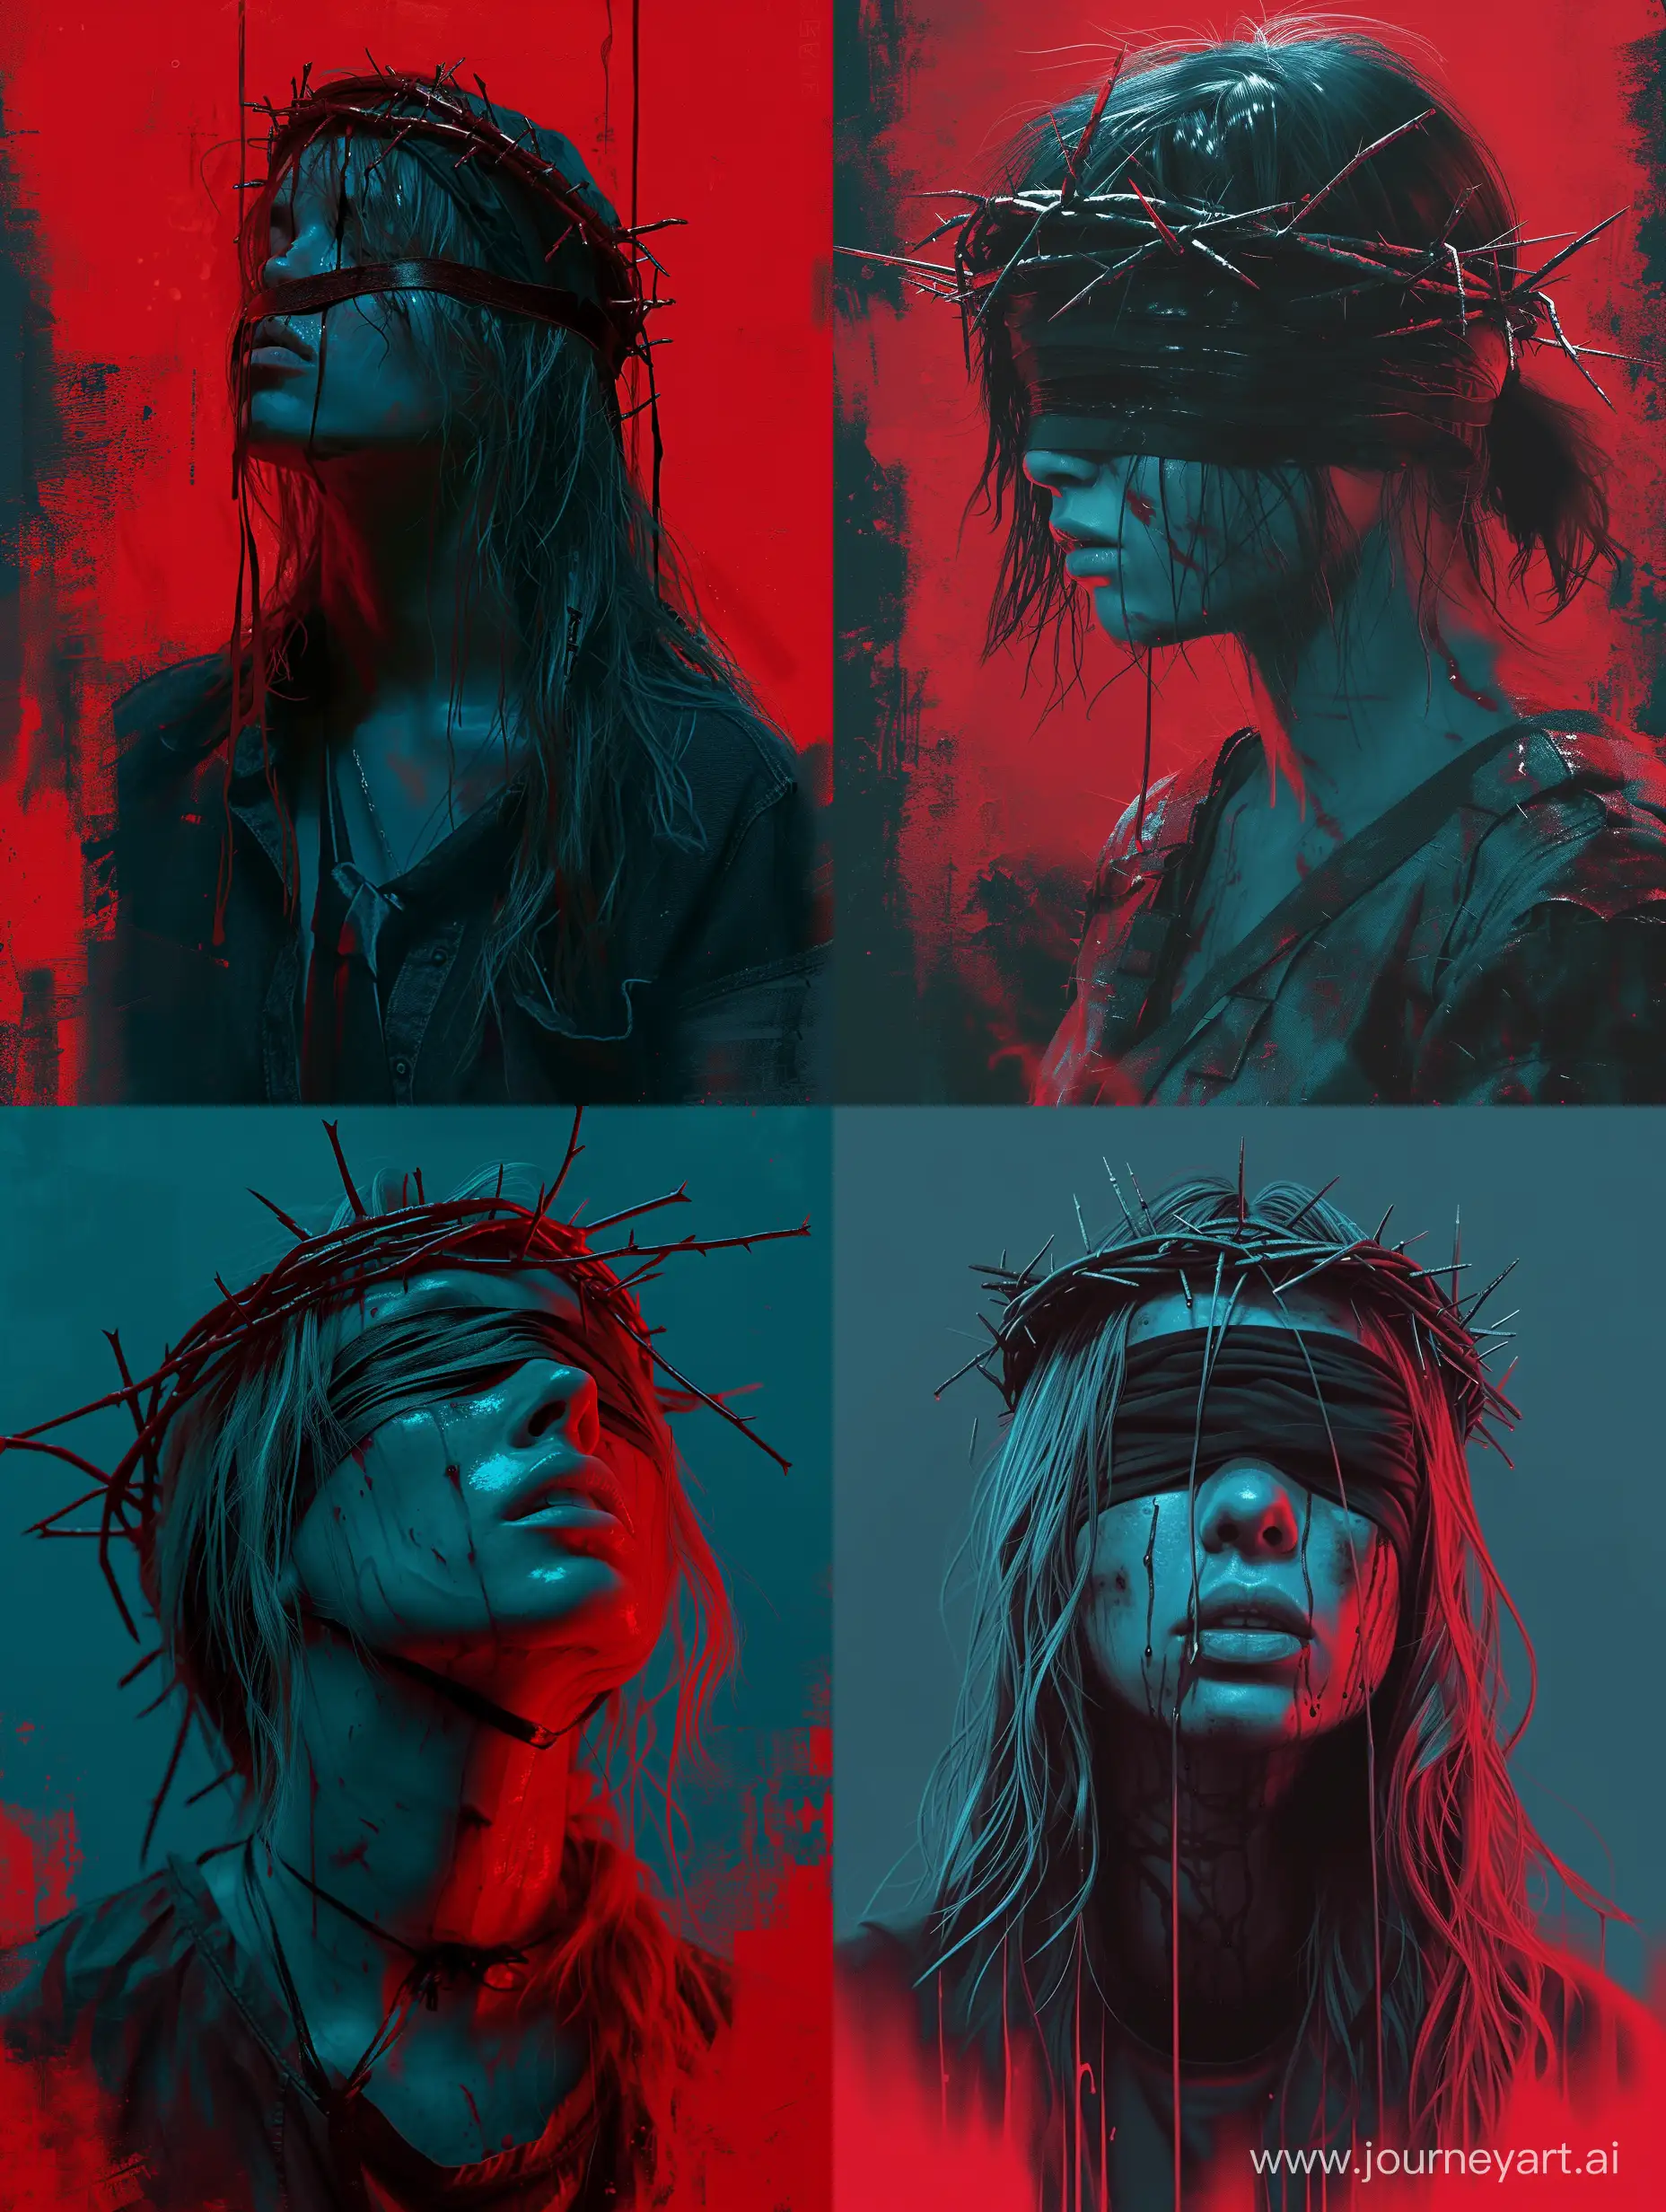 girl, Crown of thorns, blindfold,on a red background, in the style of sam spratt, aggressive digital illustration, photorealist details, intense action scenes, dark cyan and red, realistic hyper-detailed portraits, trapped emotions depicted